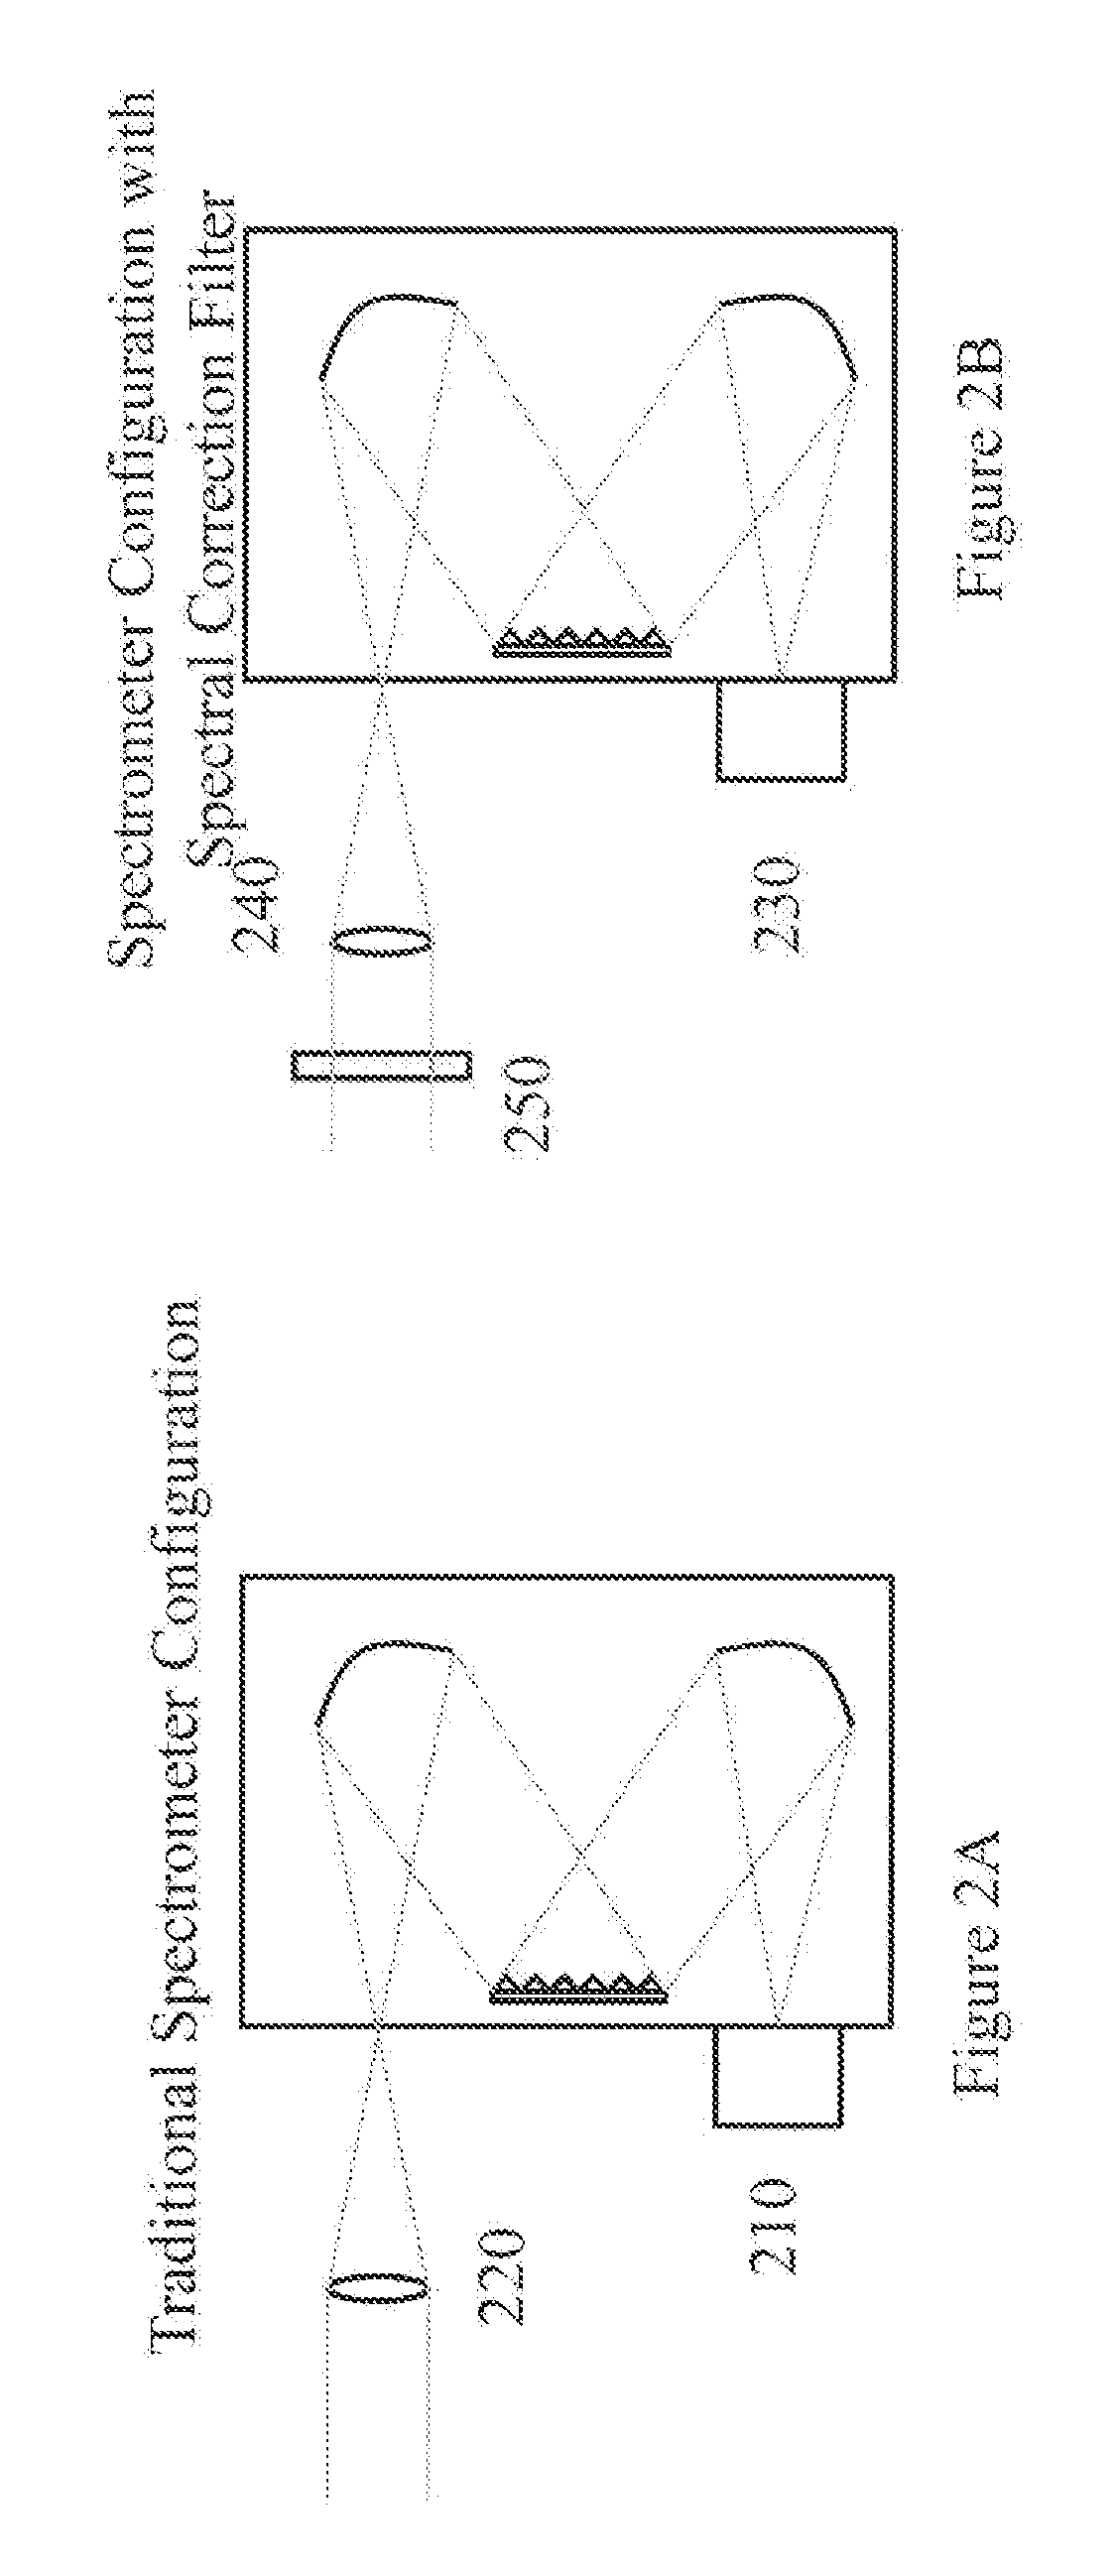 System and Method for Correcting Spectral Response Using a Radiometric Correction Filter